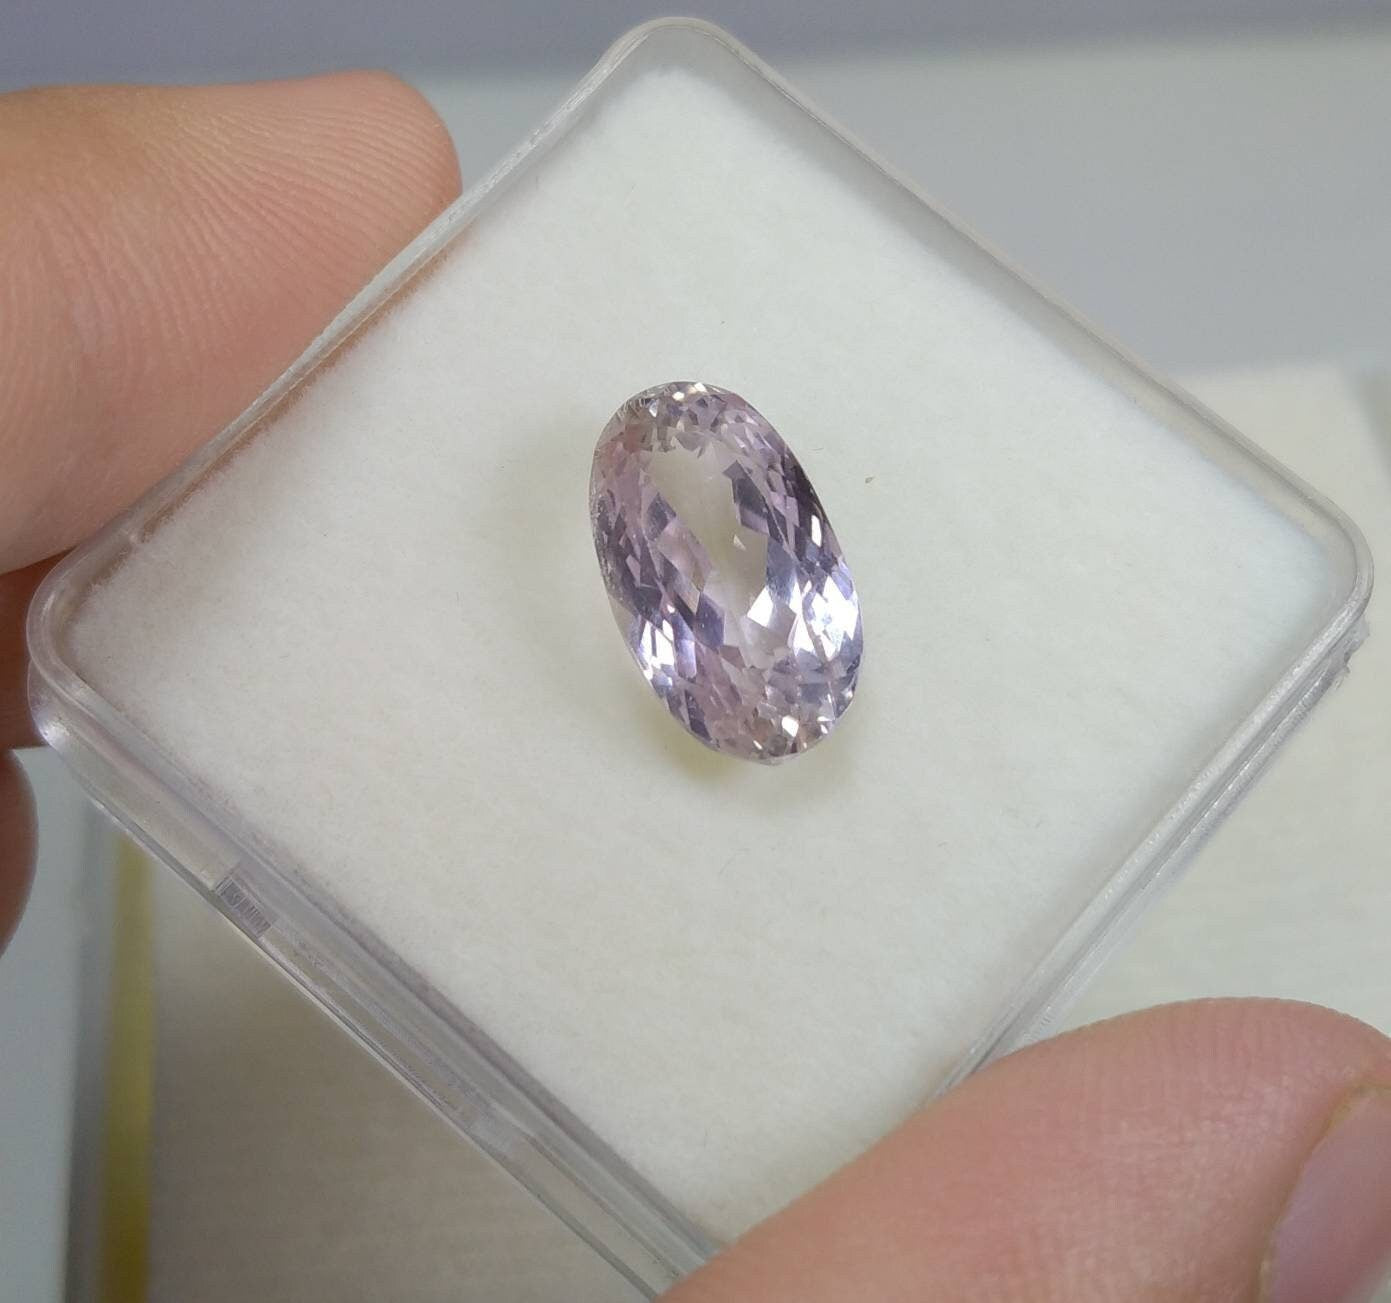 ARSAA GEMS AND MINERALSNatural top quality beautiful 7 carat VV clarity faceted oval shape kunzite gem - Premium  from ARSAA GEMS AND MINERALS - Just $30.00! Shop now at ARSAA GEMS AND MINERALS